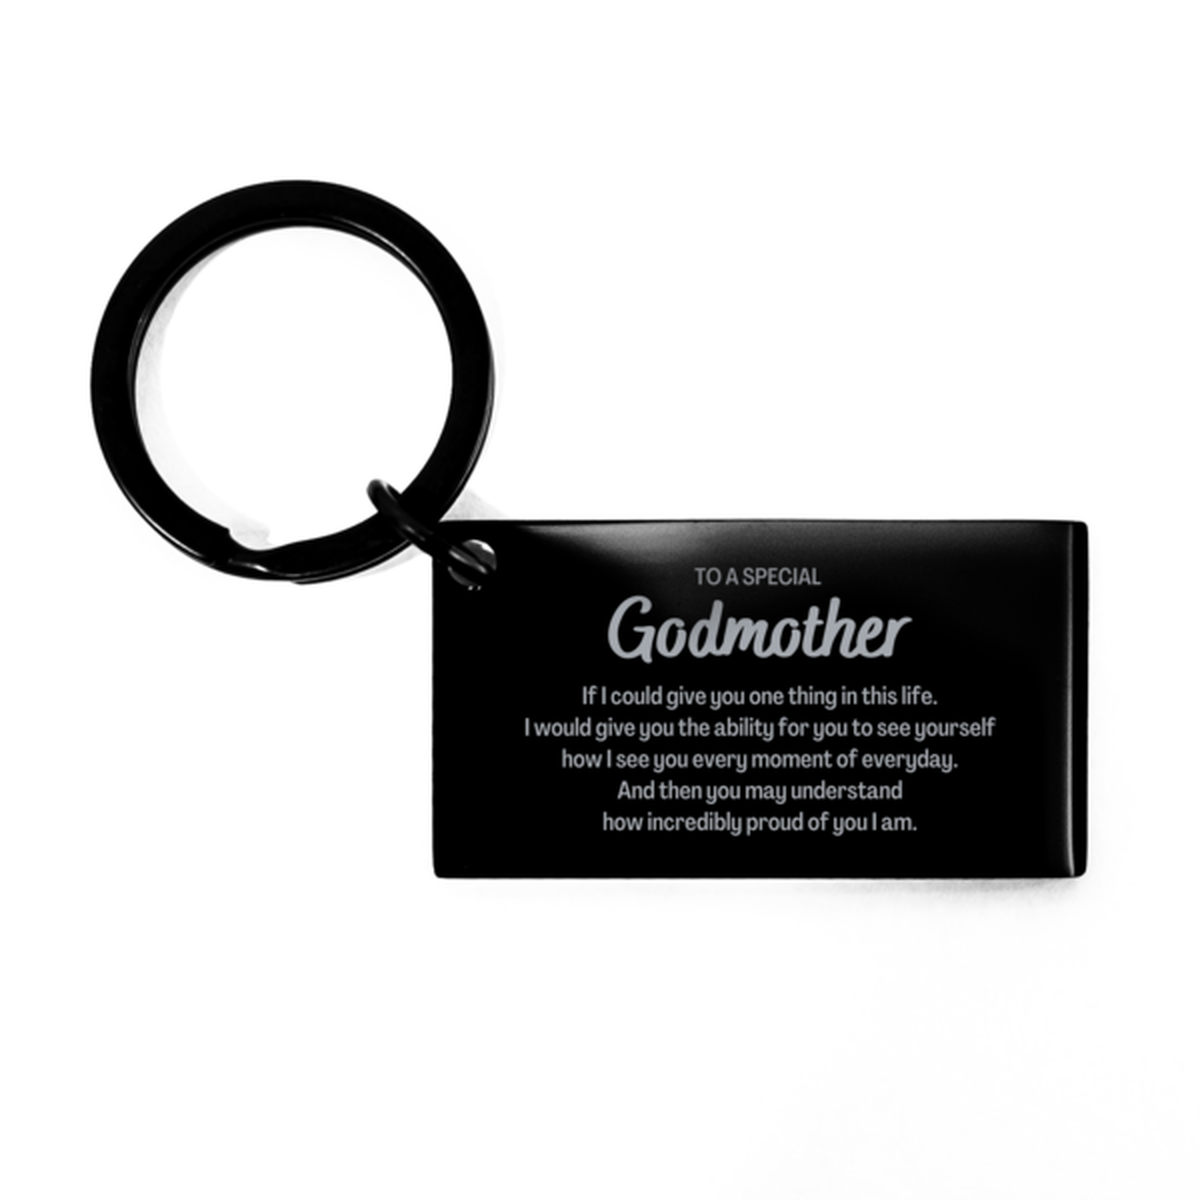 To My Godmother Keychain, Gifts For Godmother Engraved, Inspirational Gifts for Christmas Birthday, Epic Gifts for Godmother To A Special Godmother how incredibly proud of you I am